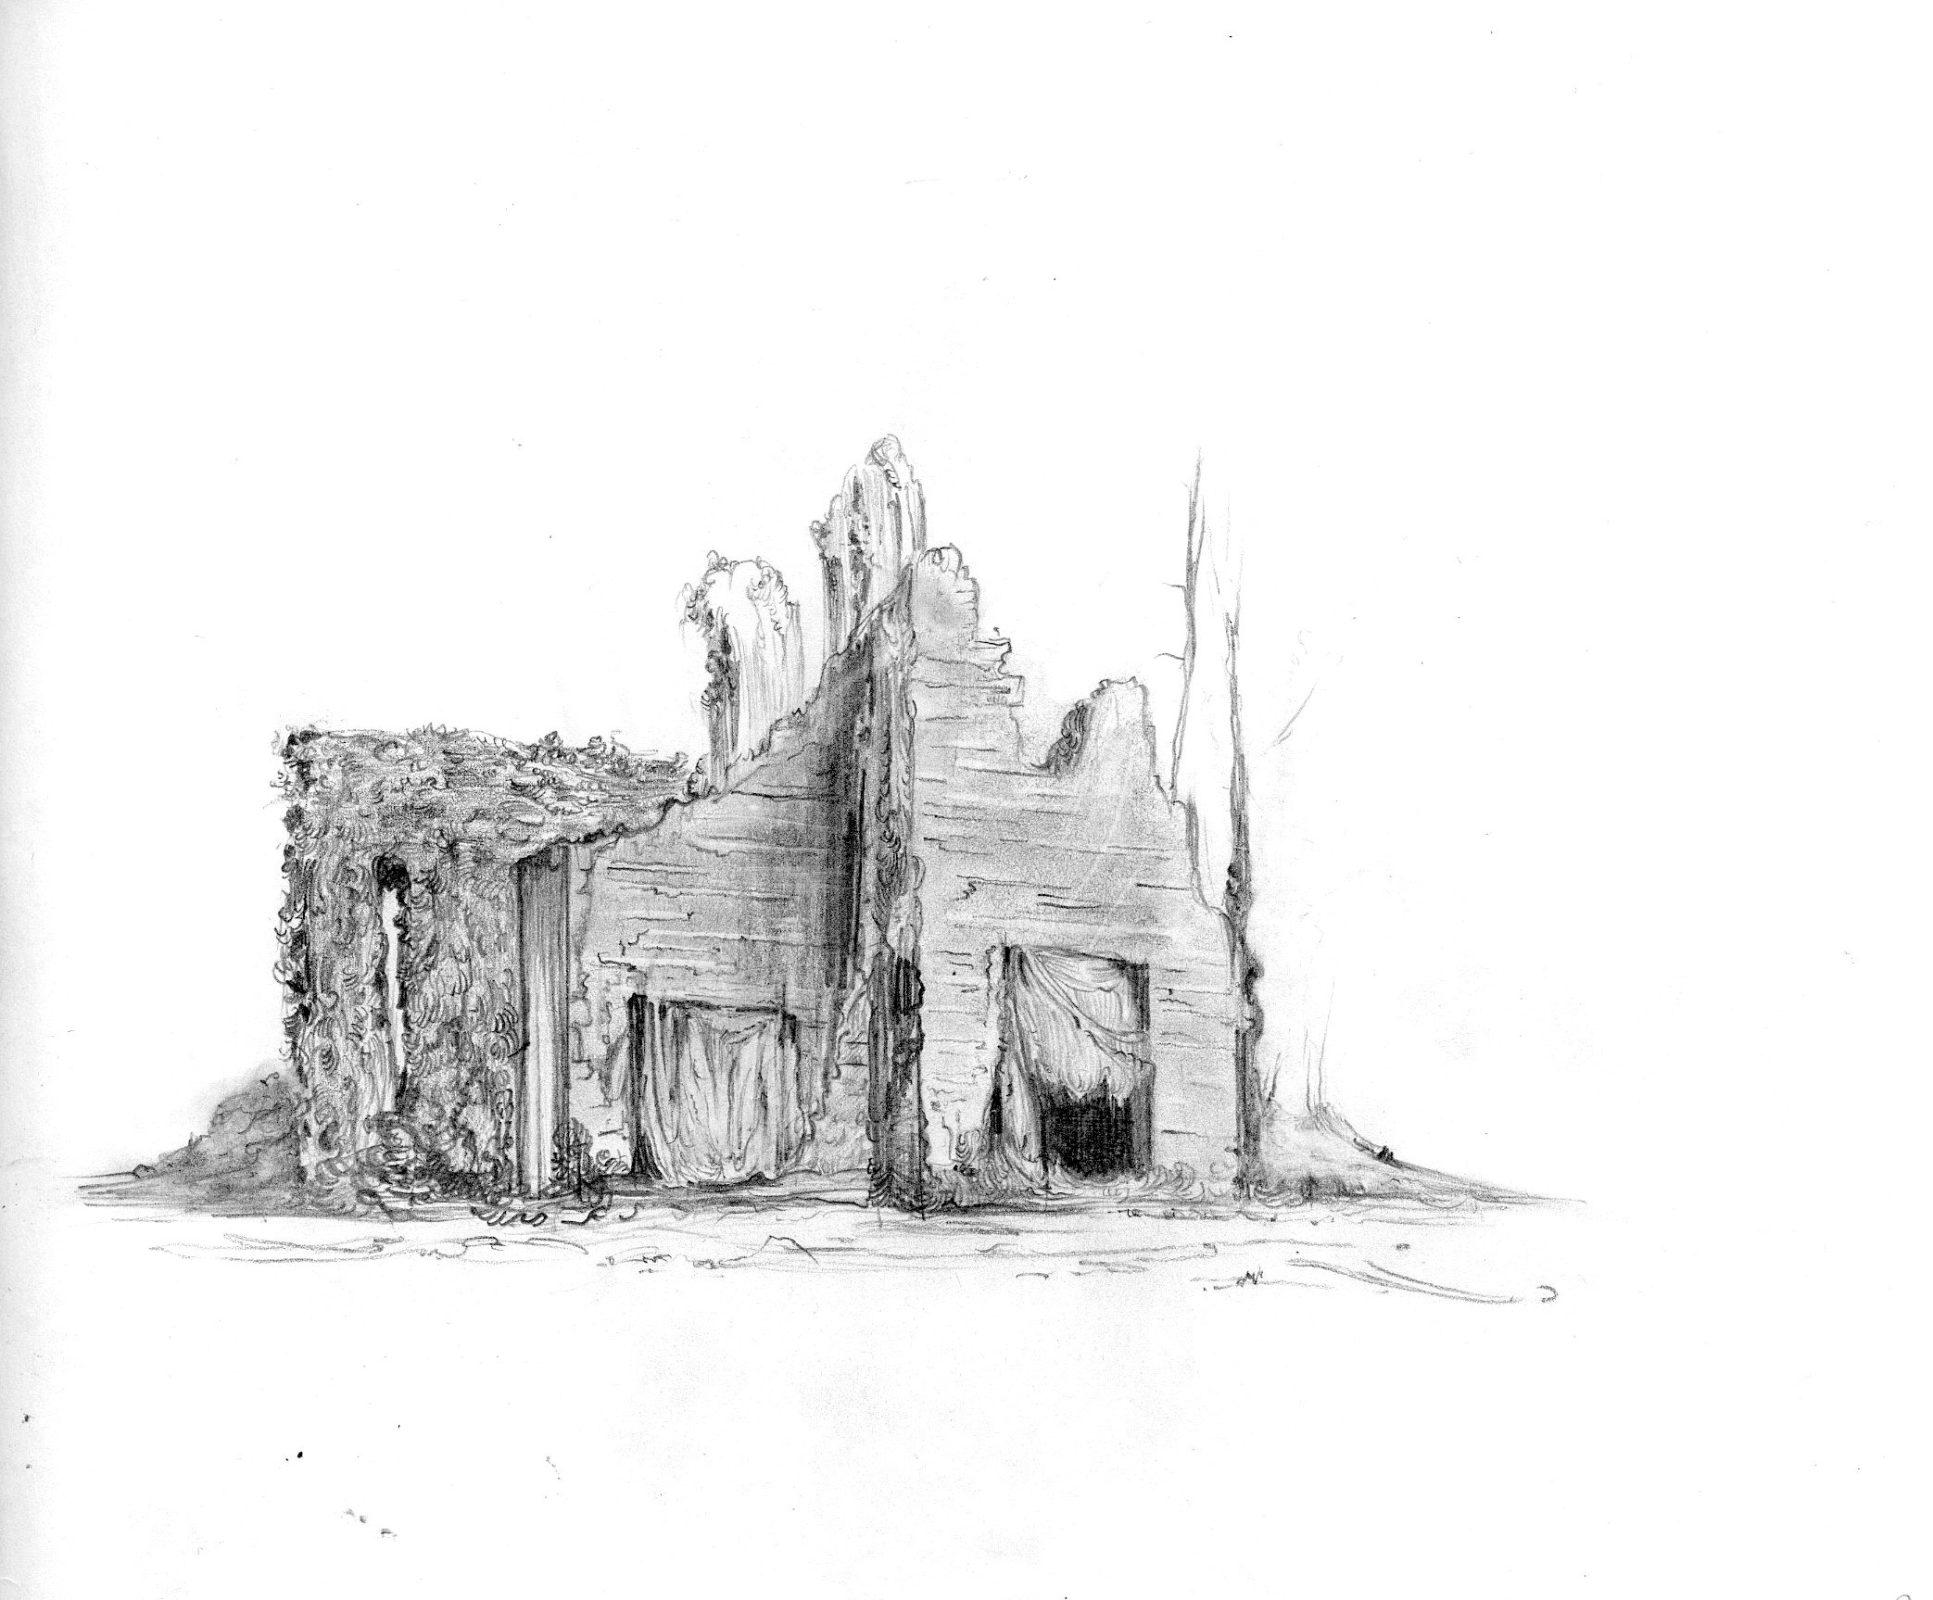 A ruin created from a variety of sources found in the archives. Graphite on paper